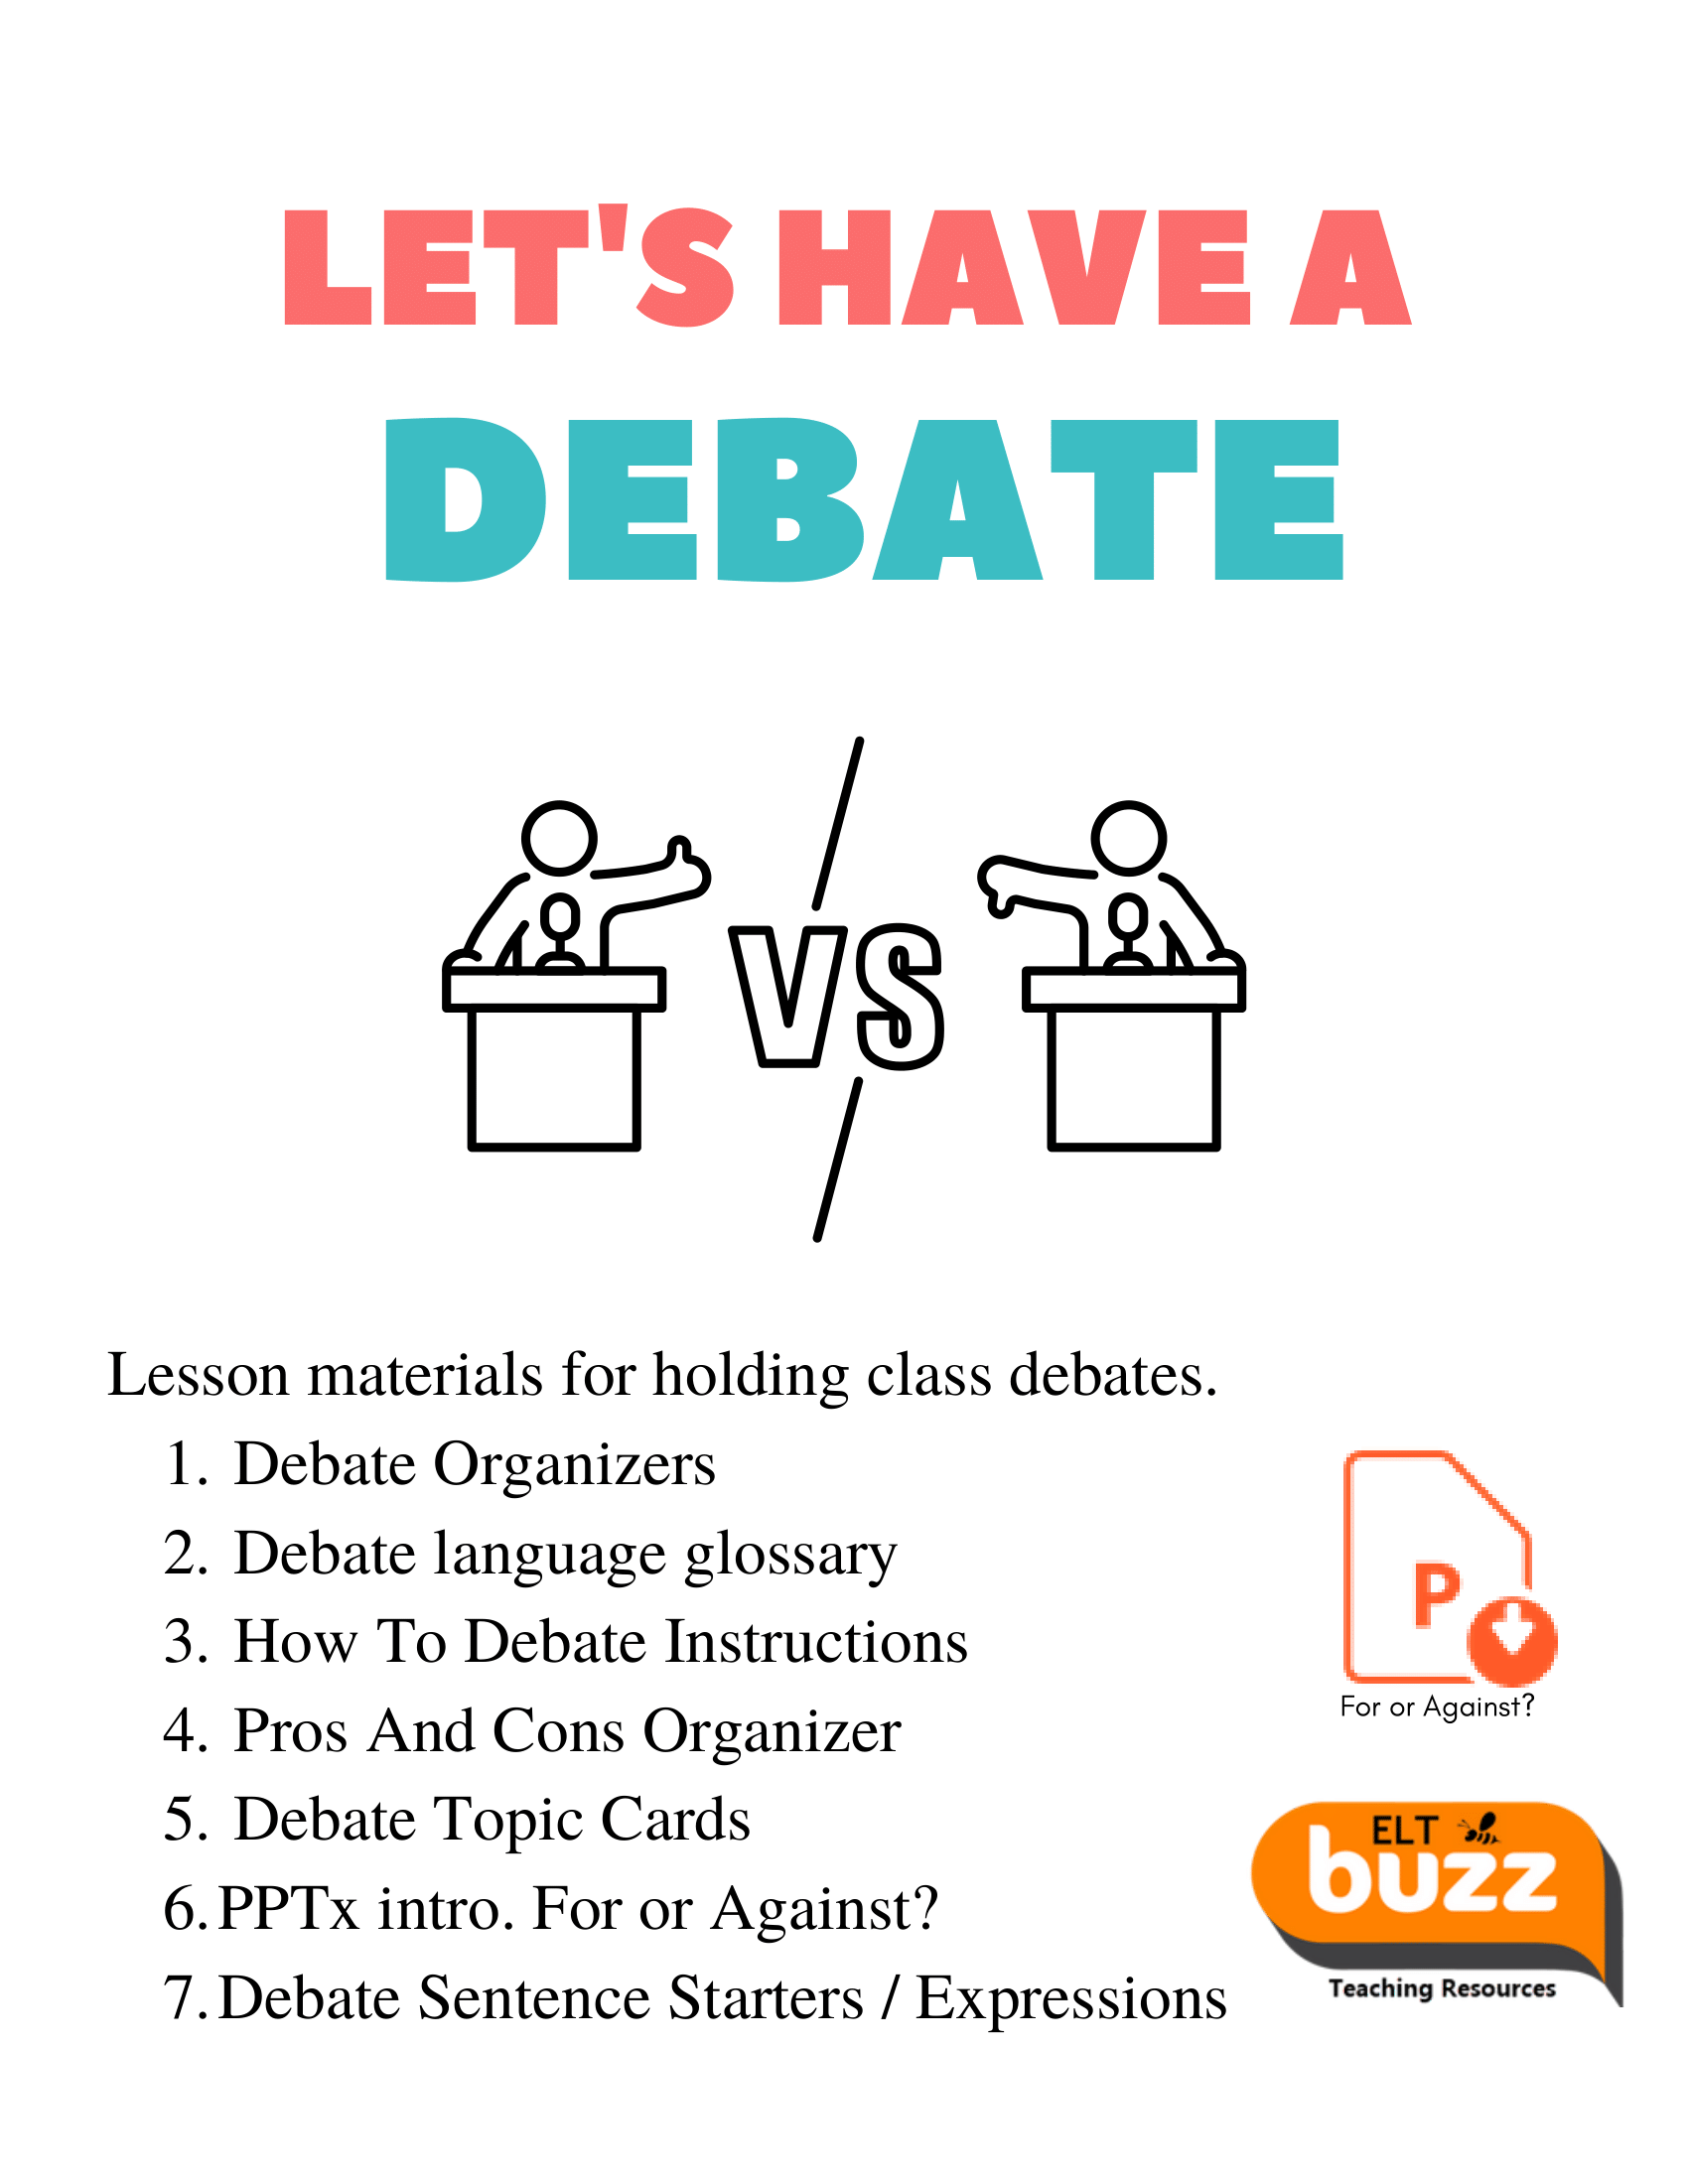 Debate It. Lesson Materials for Holding Class Debates. - Payhip